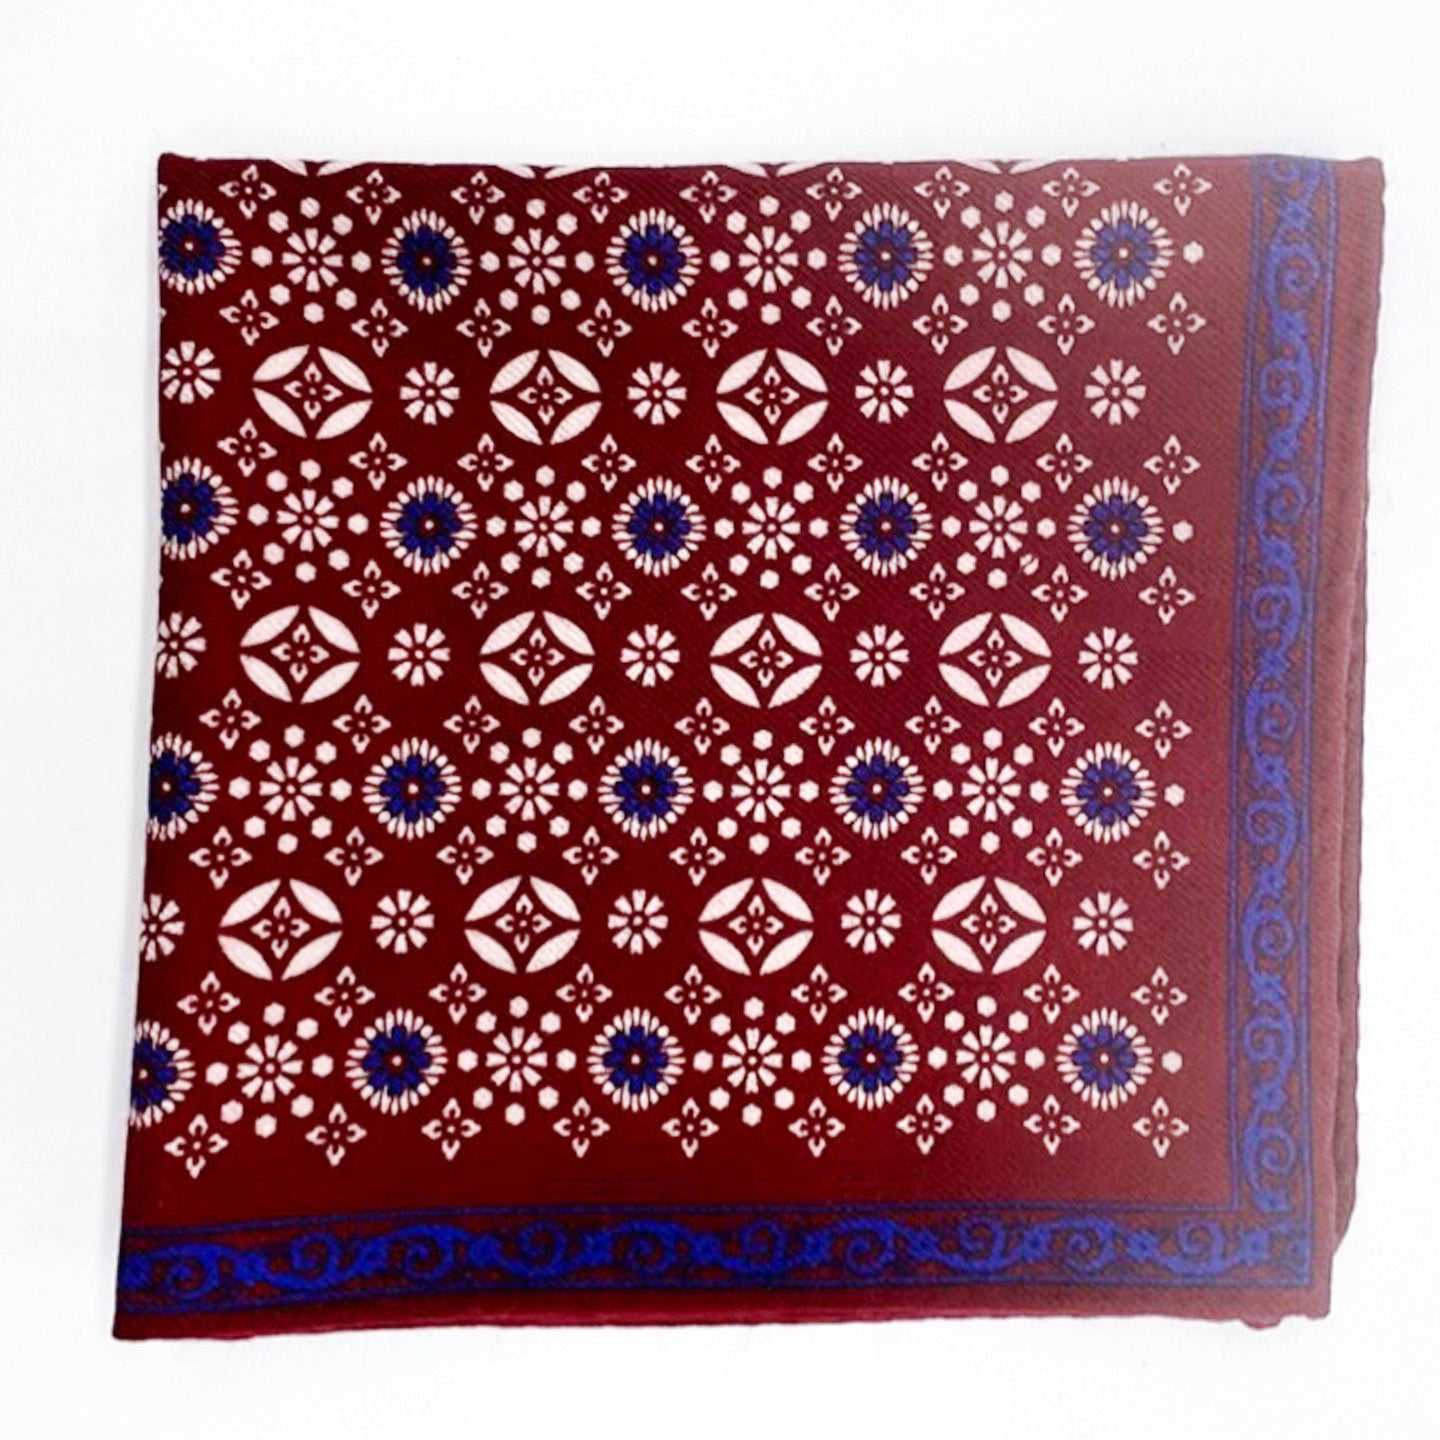 Pure wool 'Hampi' pocket square folded into a quarter and placed on a white background, showing white and blue decorative floral patterns on a red ground.